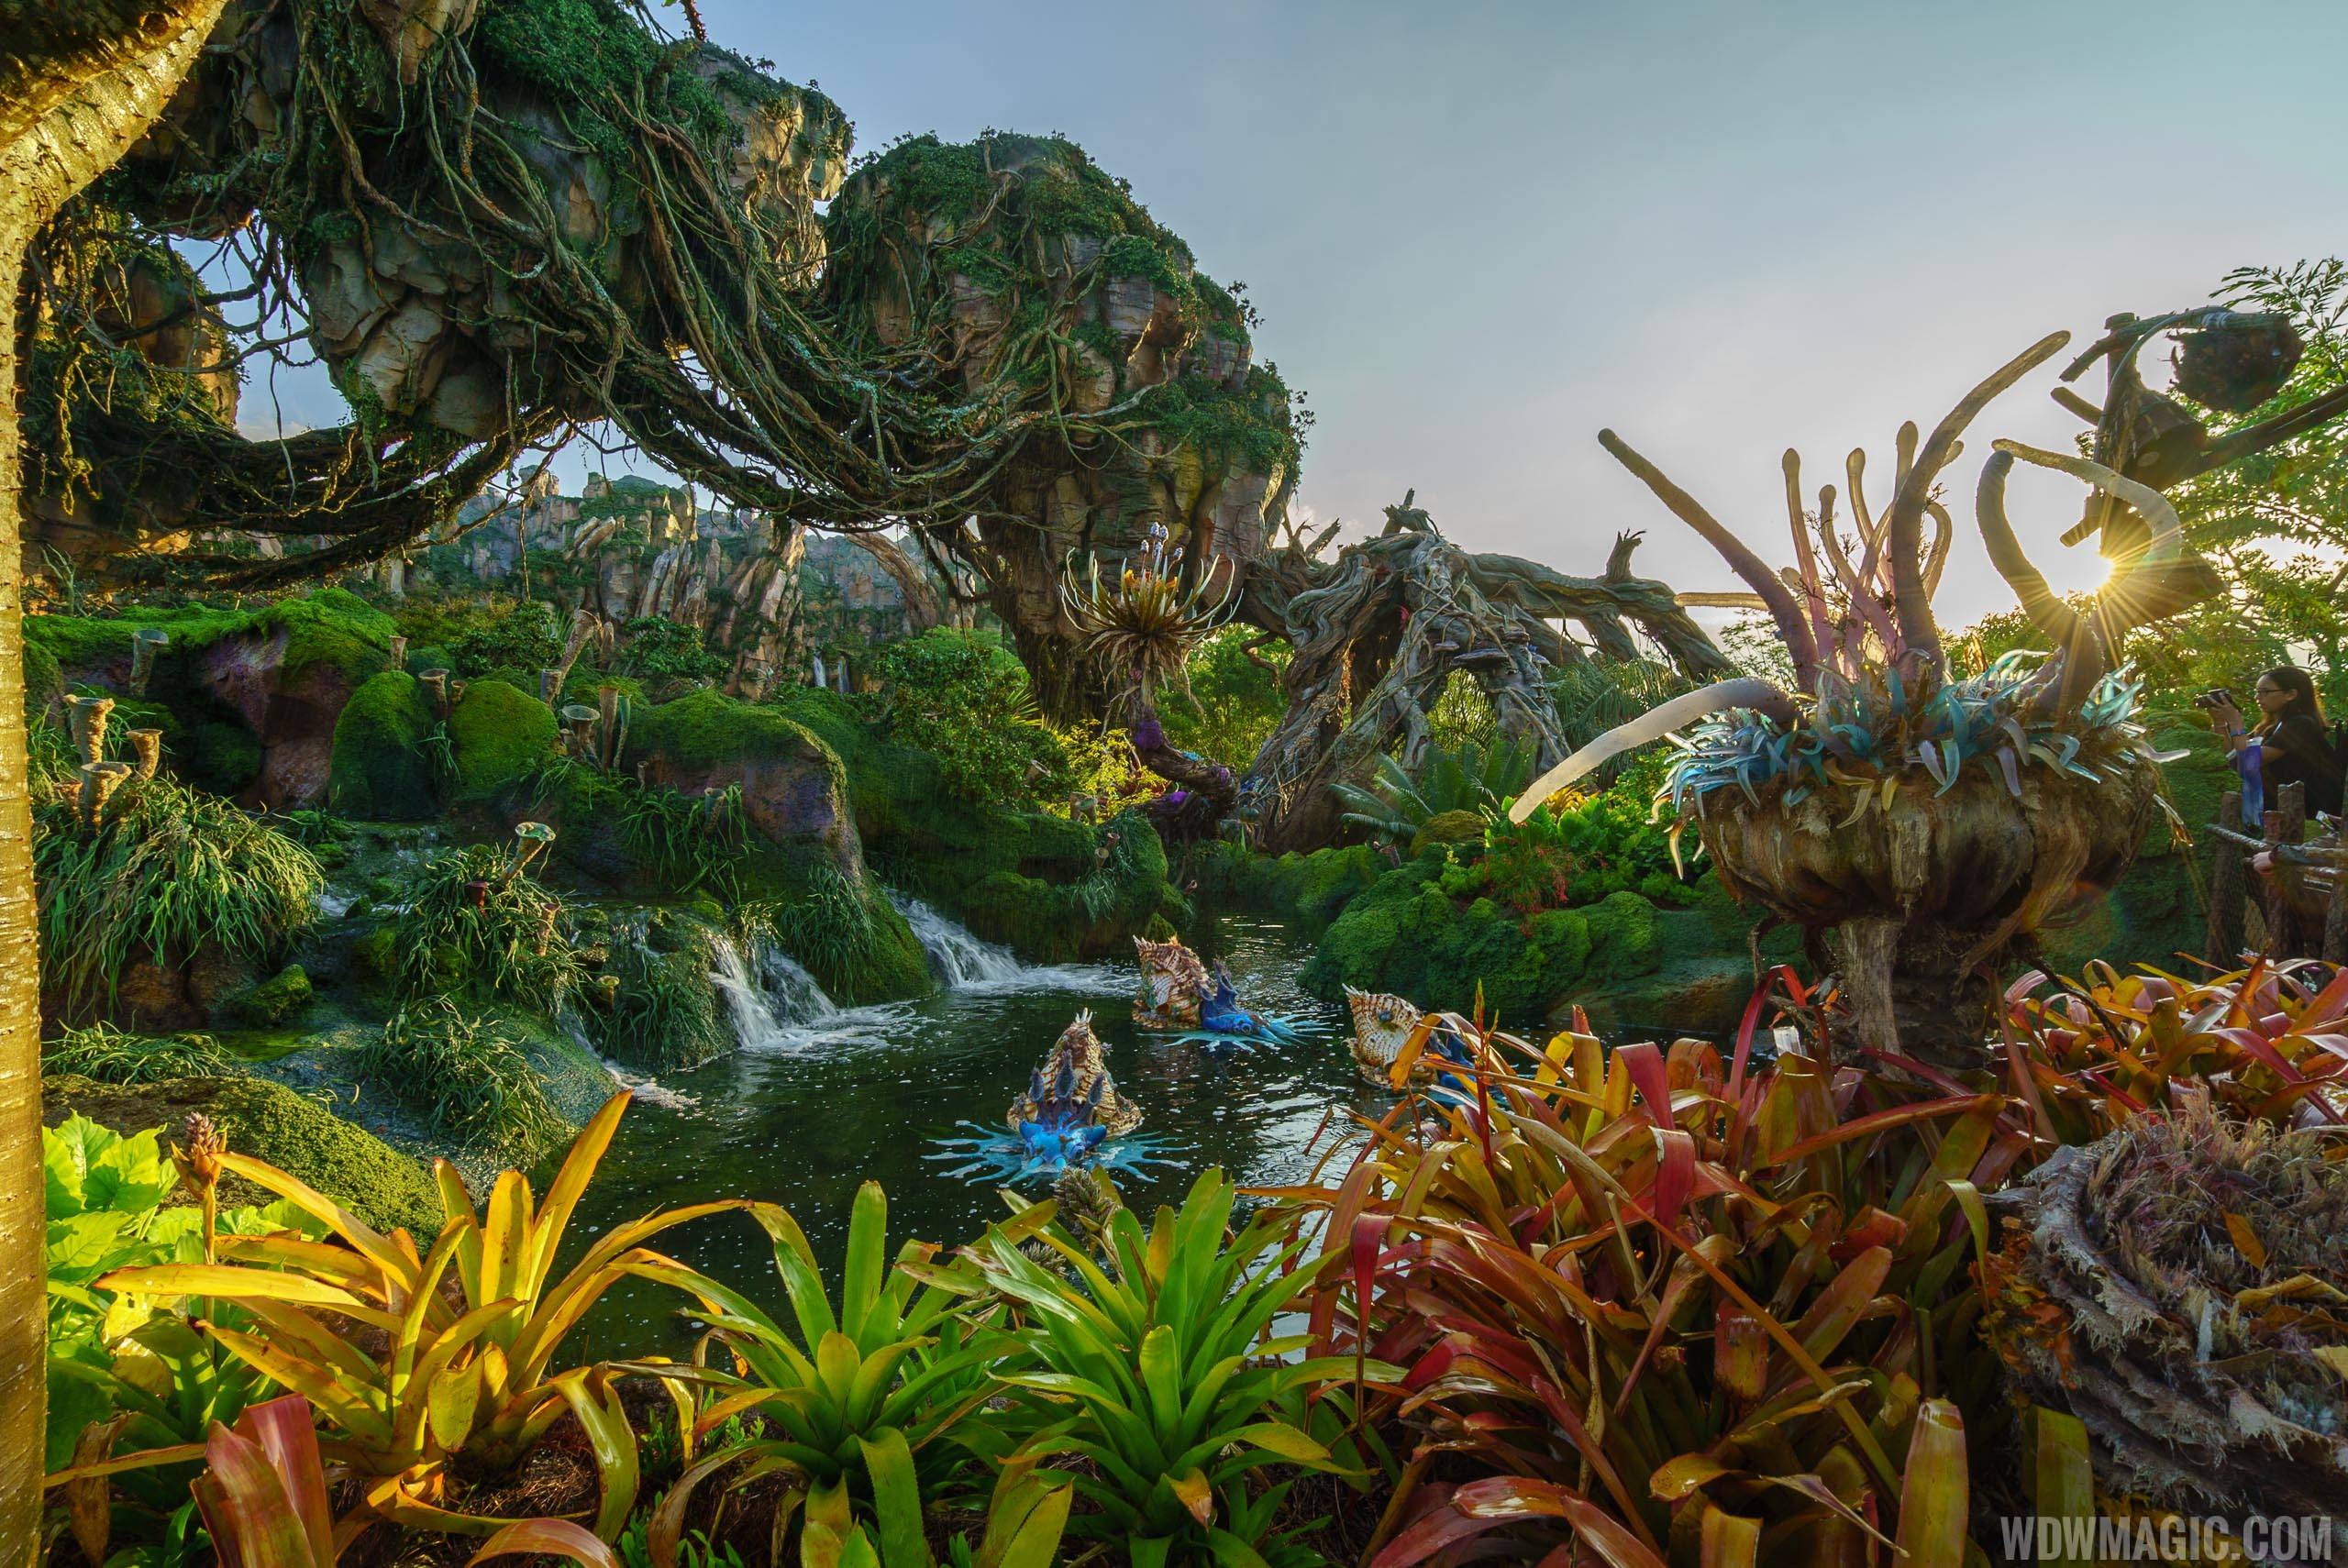 7 Ways Pandora The World of Avatar Has the Potential to be Awesome